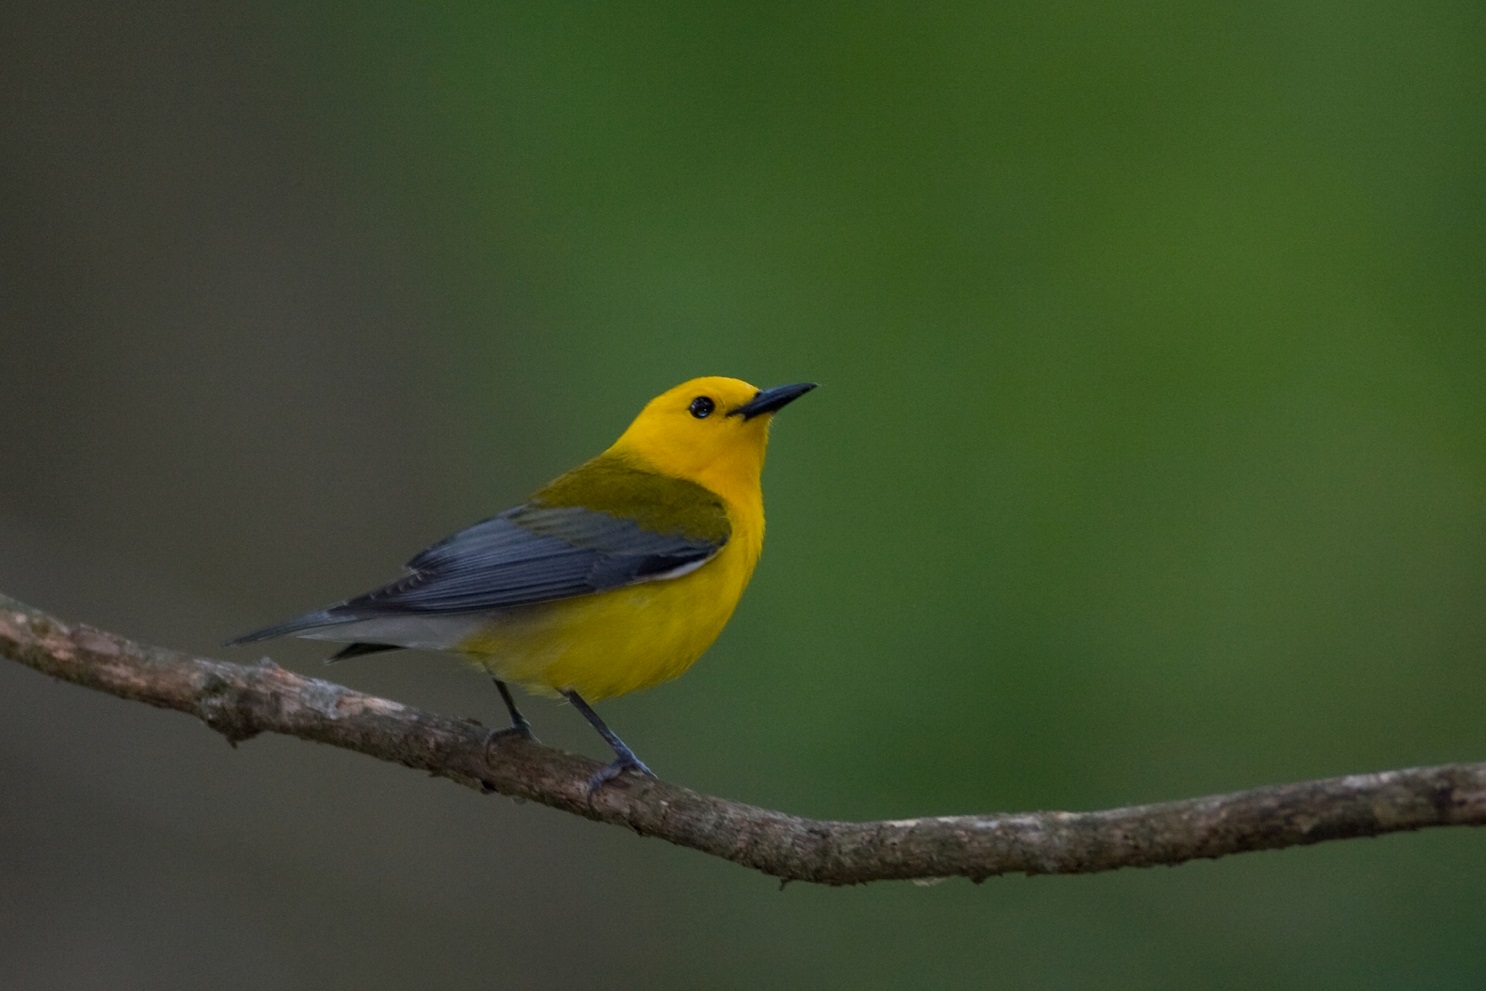 Photo of prothonotary warbler at Congaree National Park showing a small yellow bird with dark wings and a dark beak sitting on a branch.